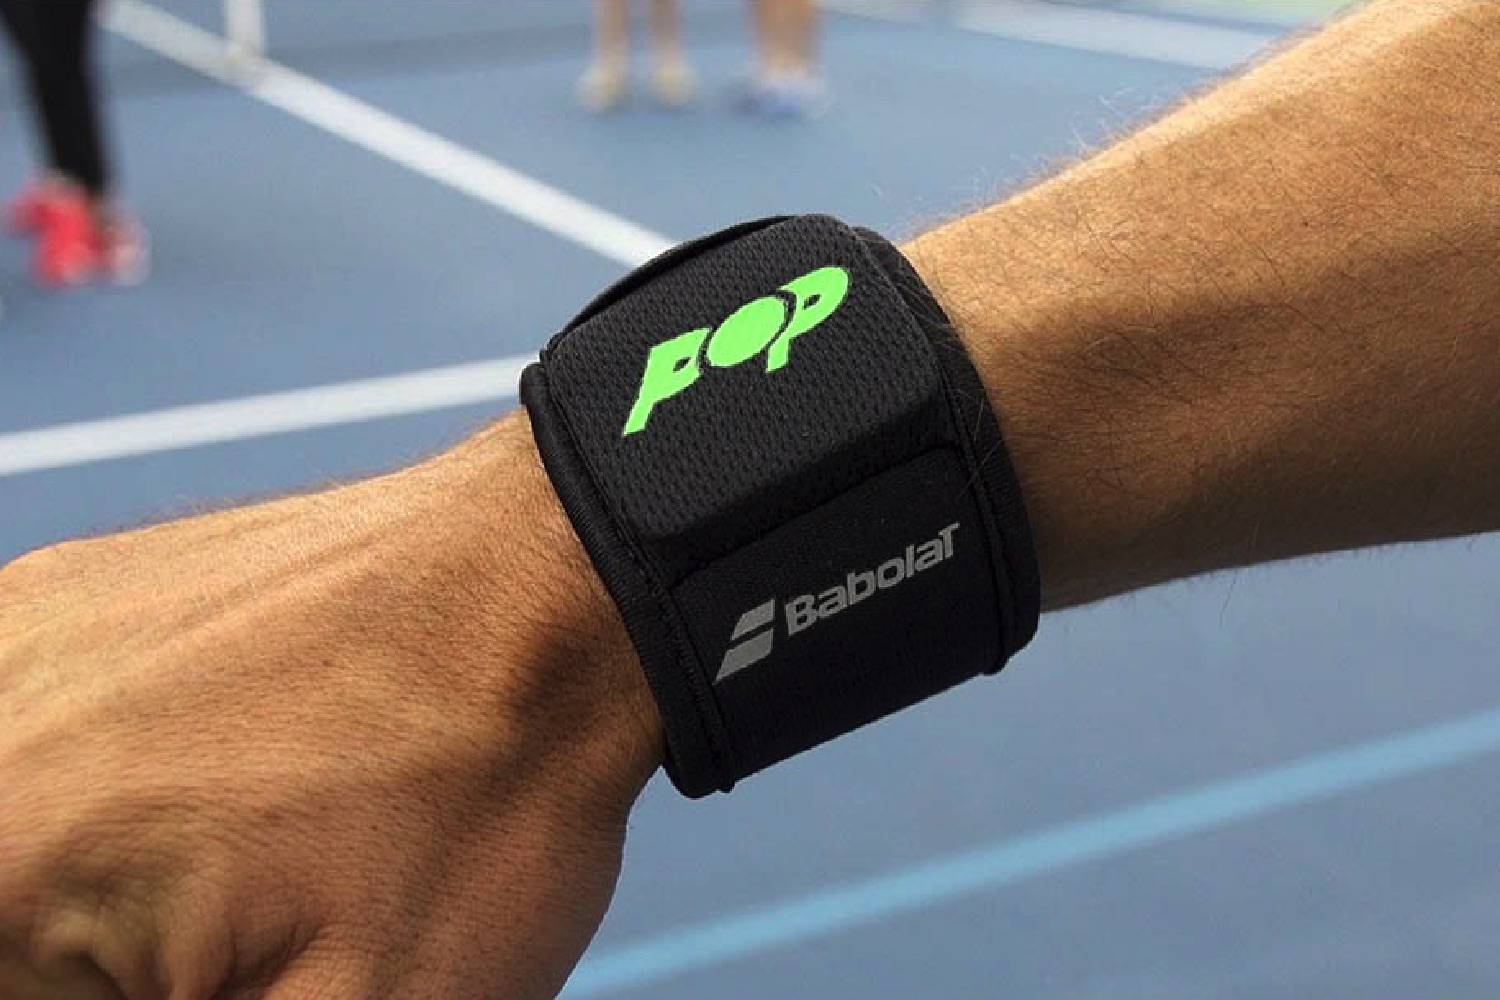 Pop is a Smart Tracker That Improve Your Game | Digital Trends